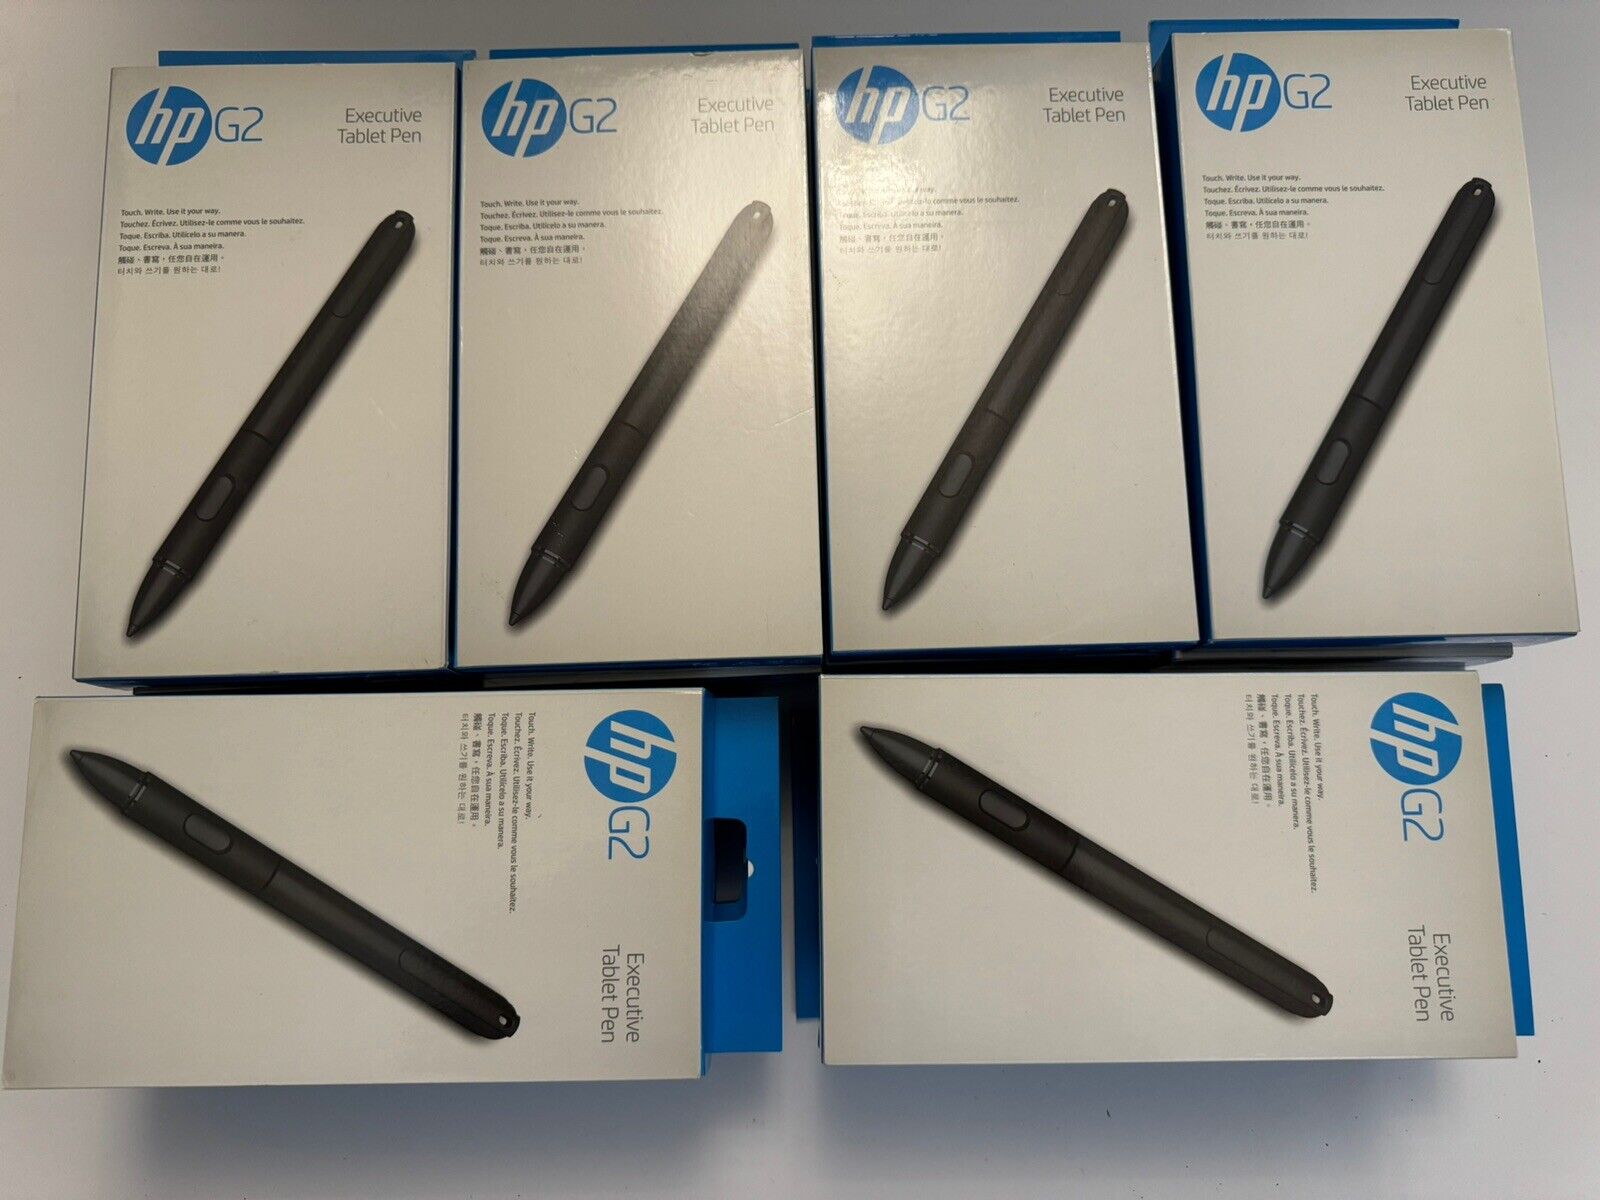 LOT OF ( 23 )  NEW HP G2 Executive Tablet Pen Battery Included